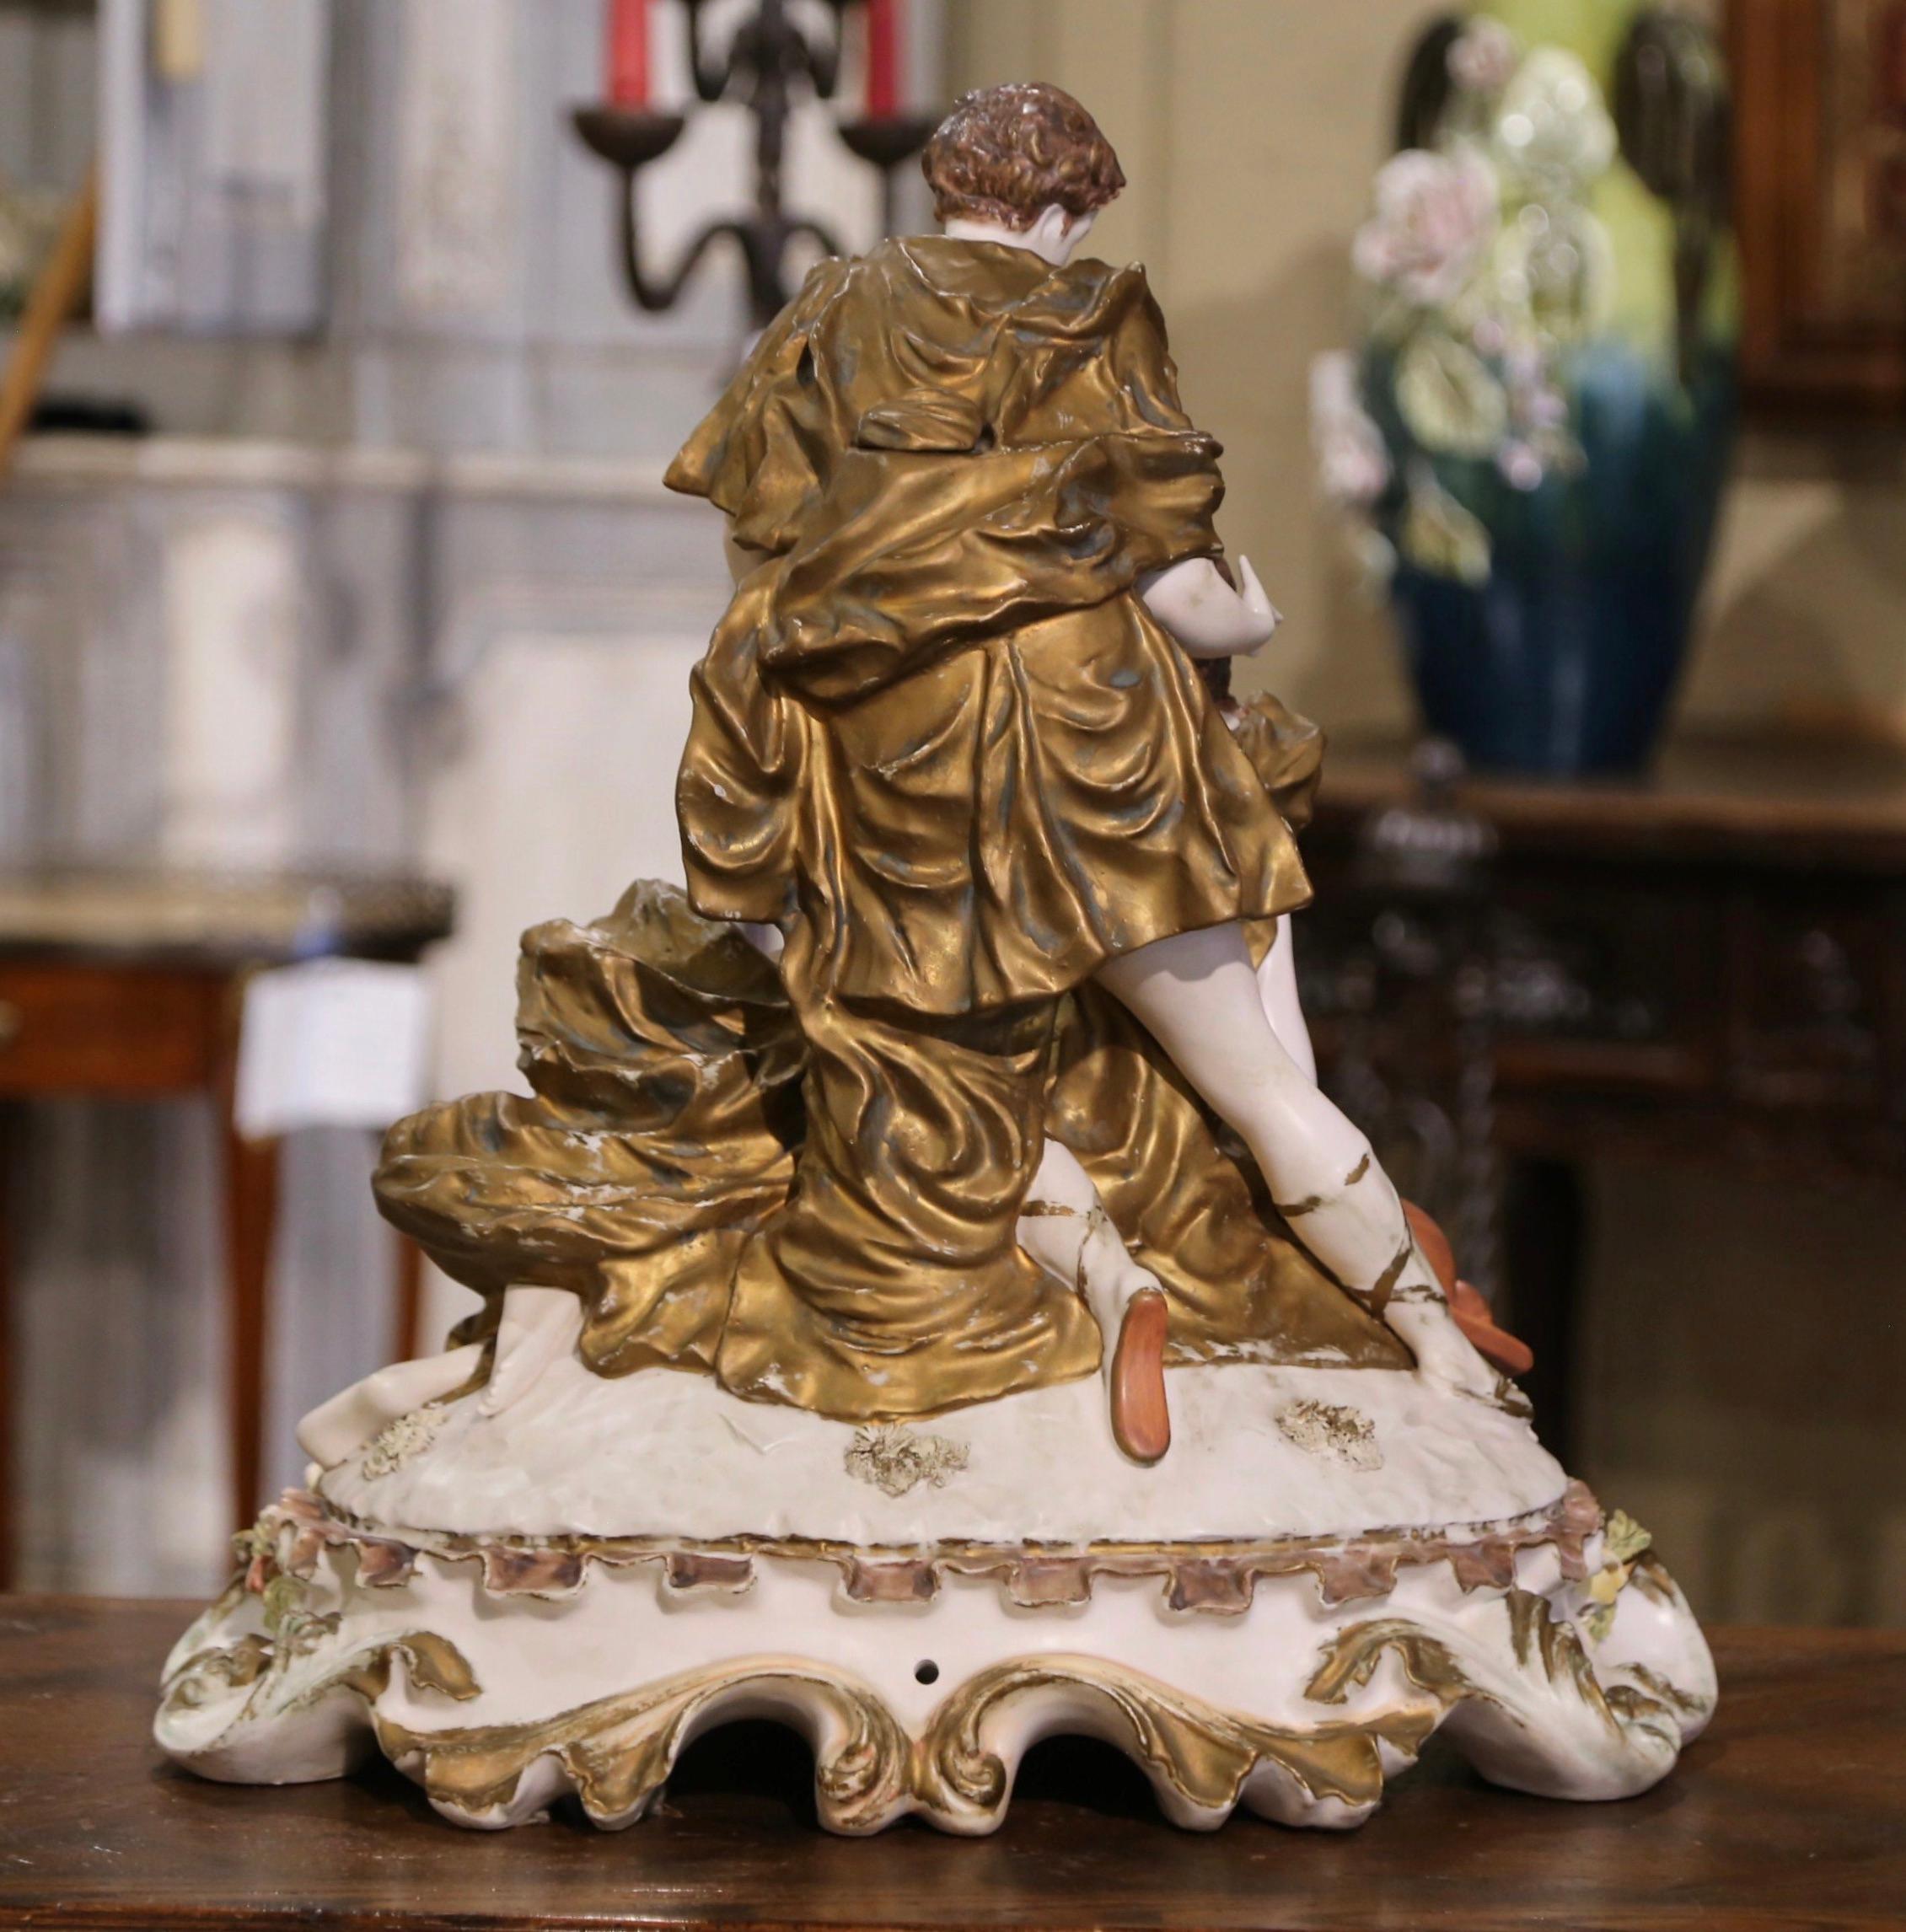 20th Century Italian Hand-Painted and Gilt Porcelain Capodimonte Figurine Statue For Sale 5